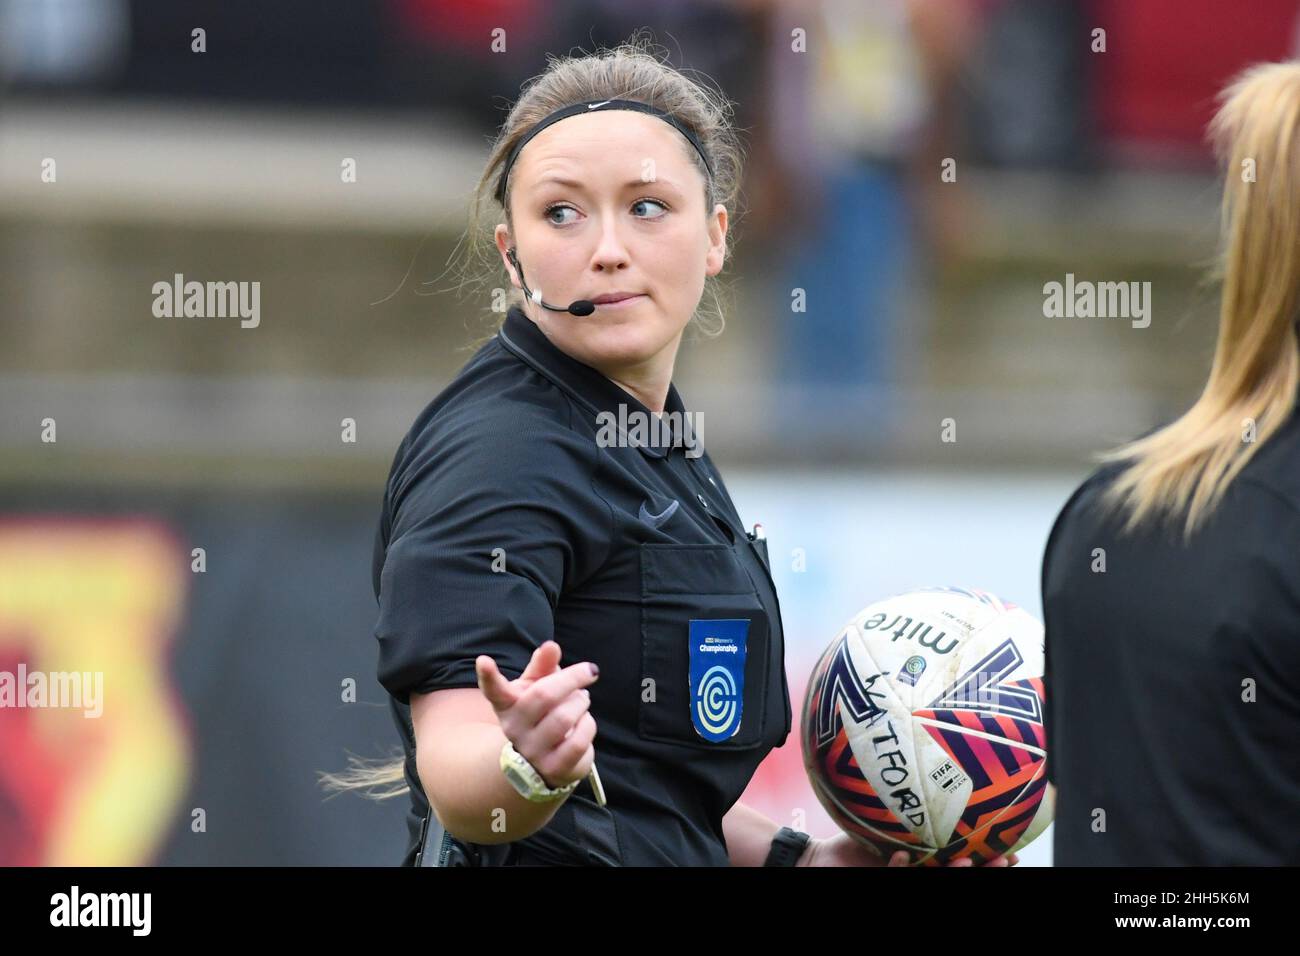 Kings Langley, UK. 23rd January, 2022. Kings Langley Referee Chloe Ann Anderson during the FA womens Championship game between Watford and Blackburn Rovers - at The Orbital Fasteners Stadium - Kings Langley, England Kevin Hodgson /SPP Credit: SPP Sport Press Photo. /Alamy Live News Stock Photo